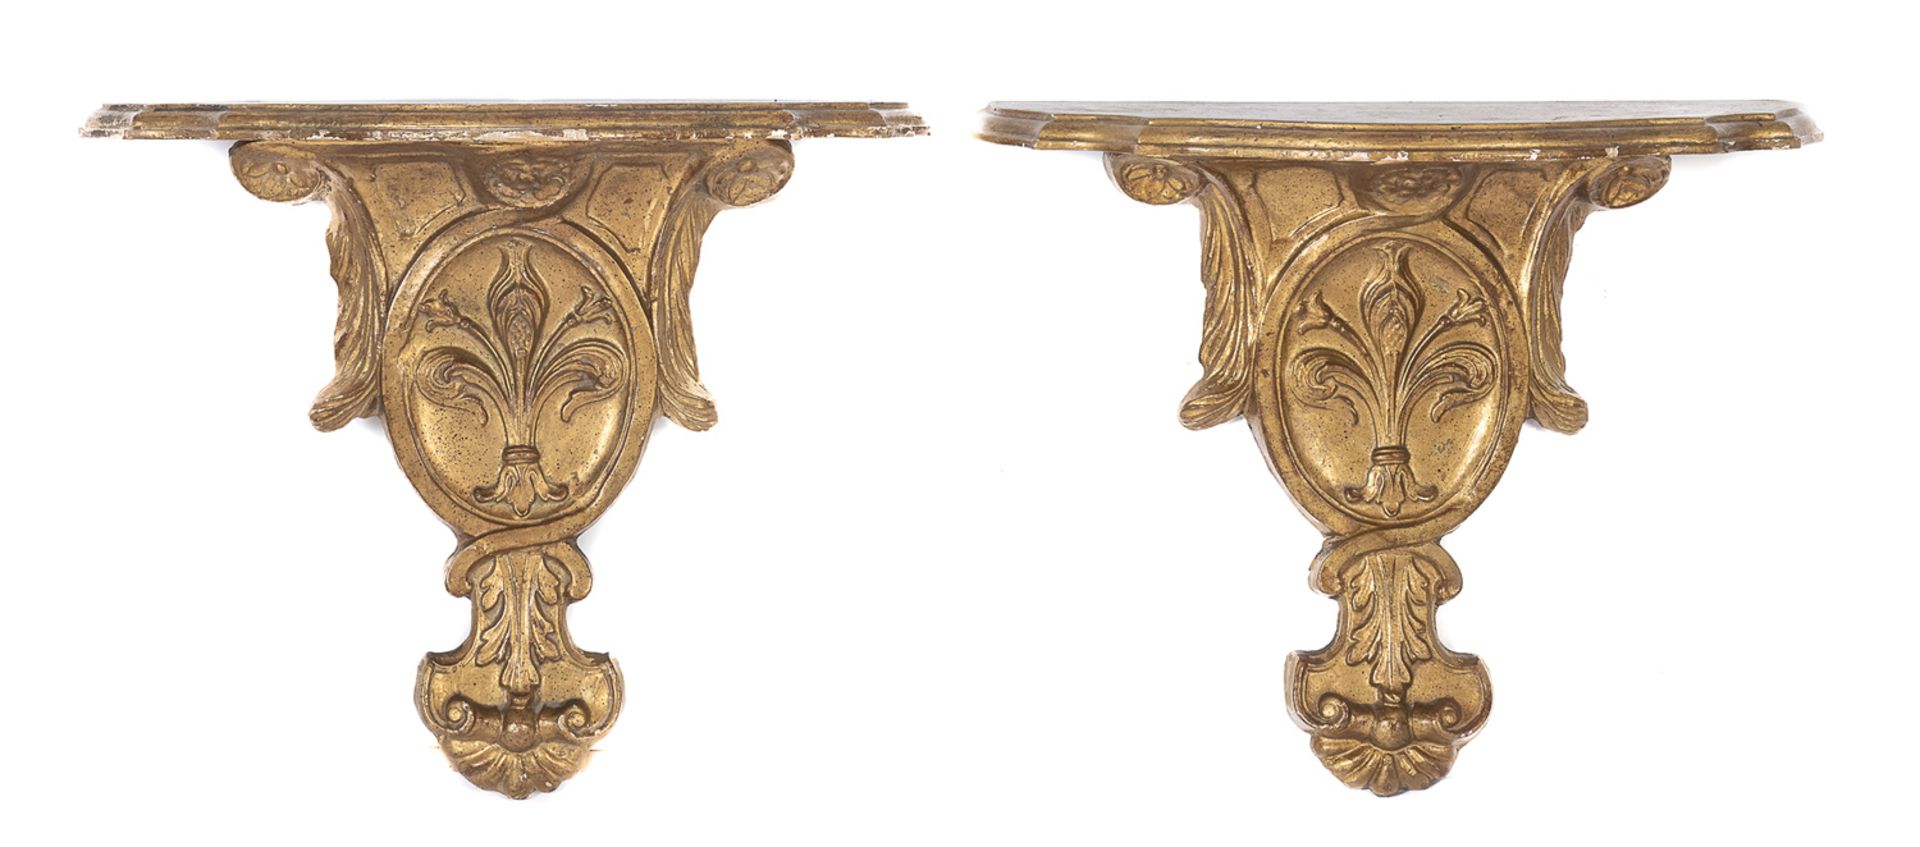 PAIR OF GILTWOOD SHELVES EARLY 20TH CENTURY